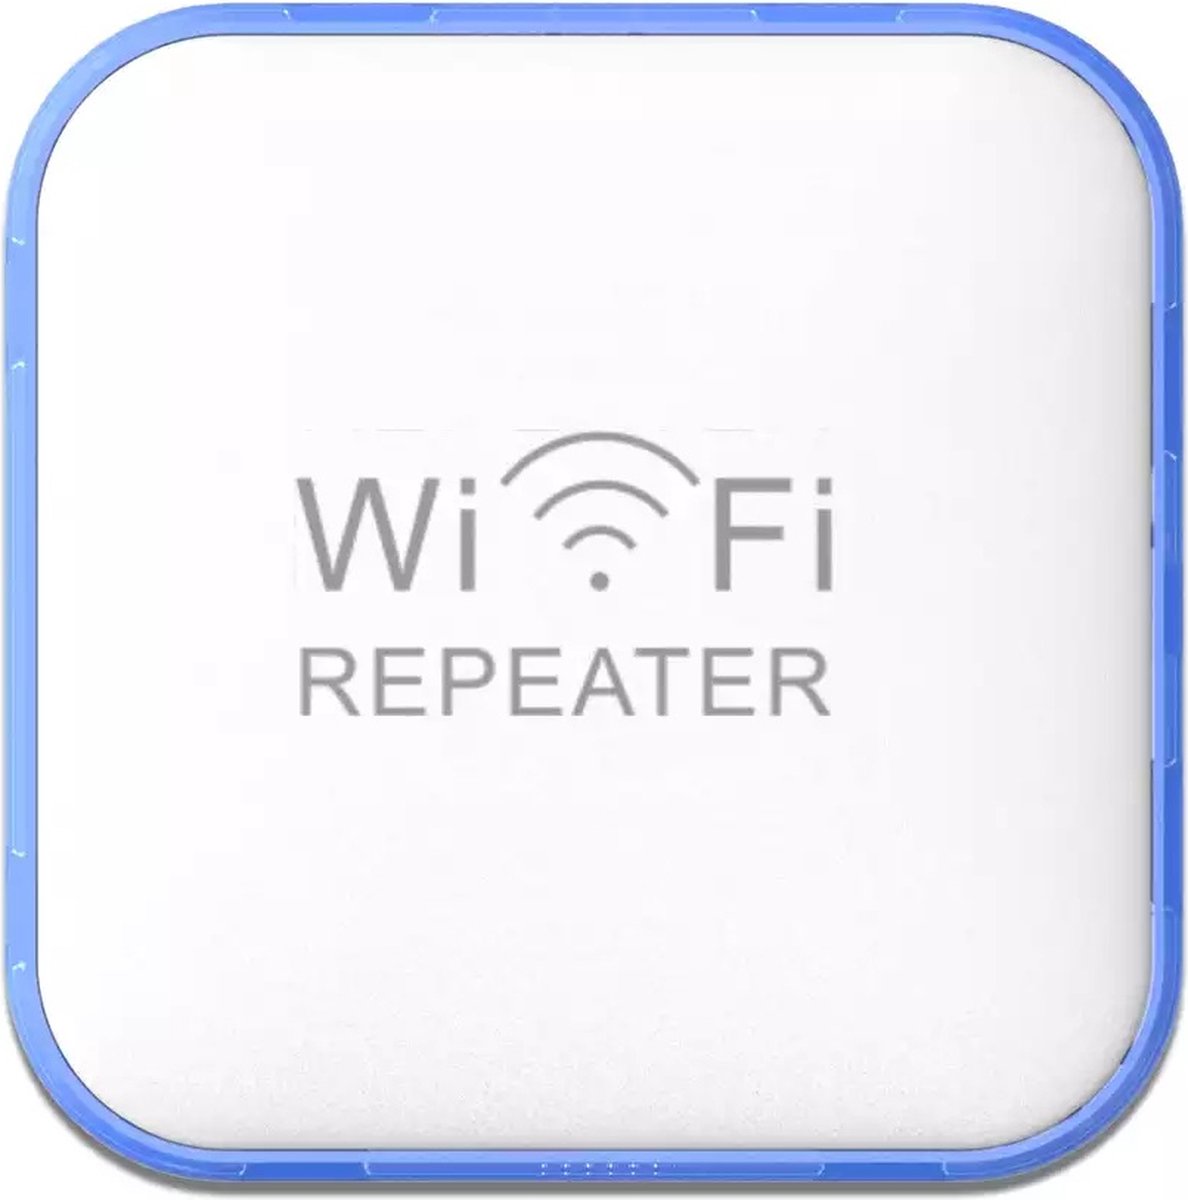 PIX-LINK LV-WR39 300Mbps Wifi AP/Repeater - Wit Extender - Super WiFi Booster - WiFi Versterker